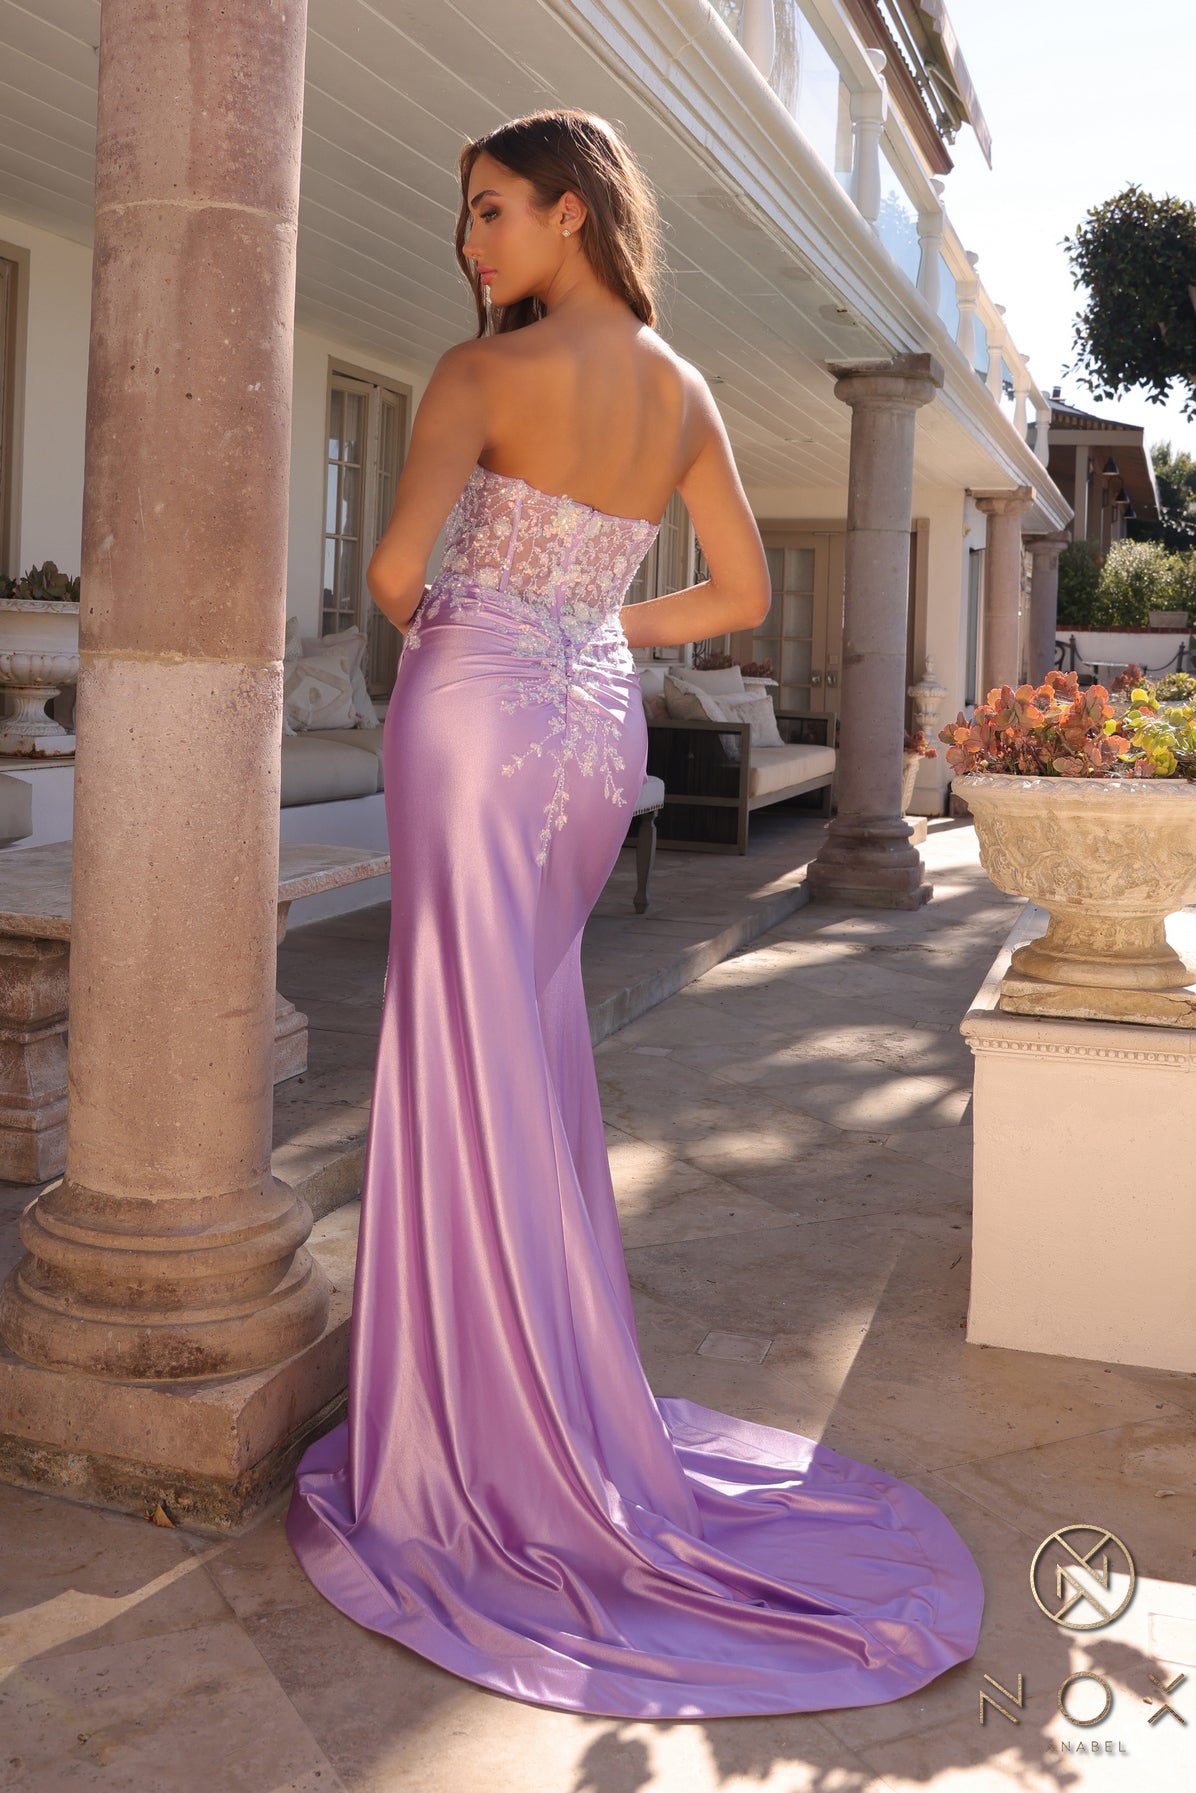 Get ready to turn heads in this stunning Nox Anabel C1346 dress! The sheer sequin detailing adds a touch of sparkle, while the strapless corset style enhances your figure. Made with luxurious satin, this maxi dress features a sultry slit for a formal yet sexy look. Perfect for prom or any special occasion.